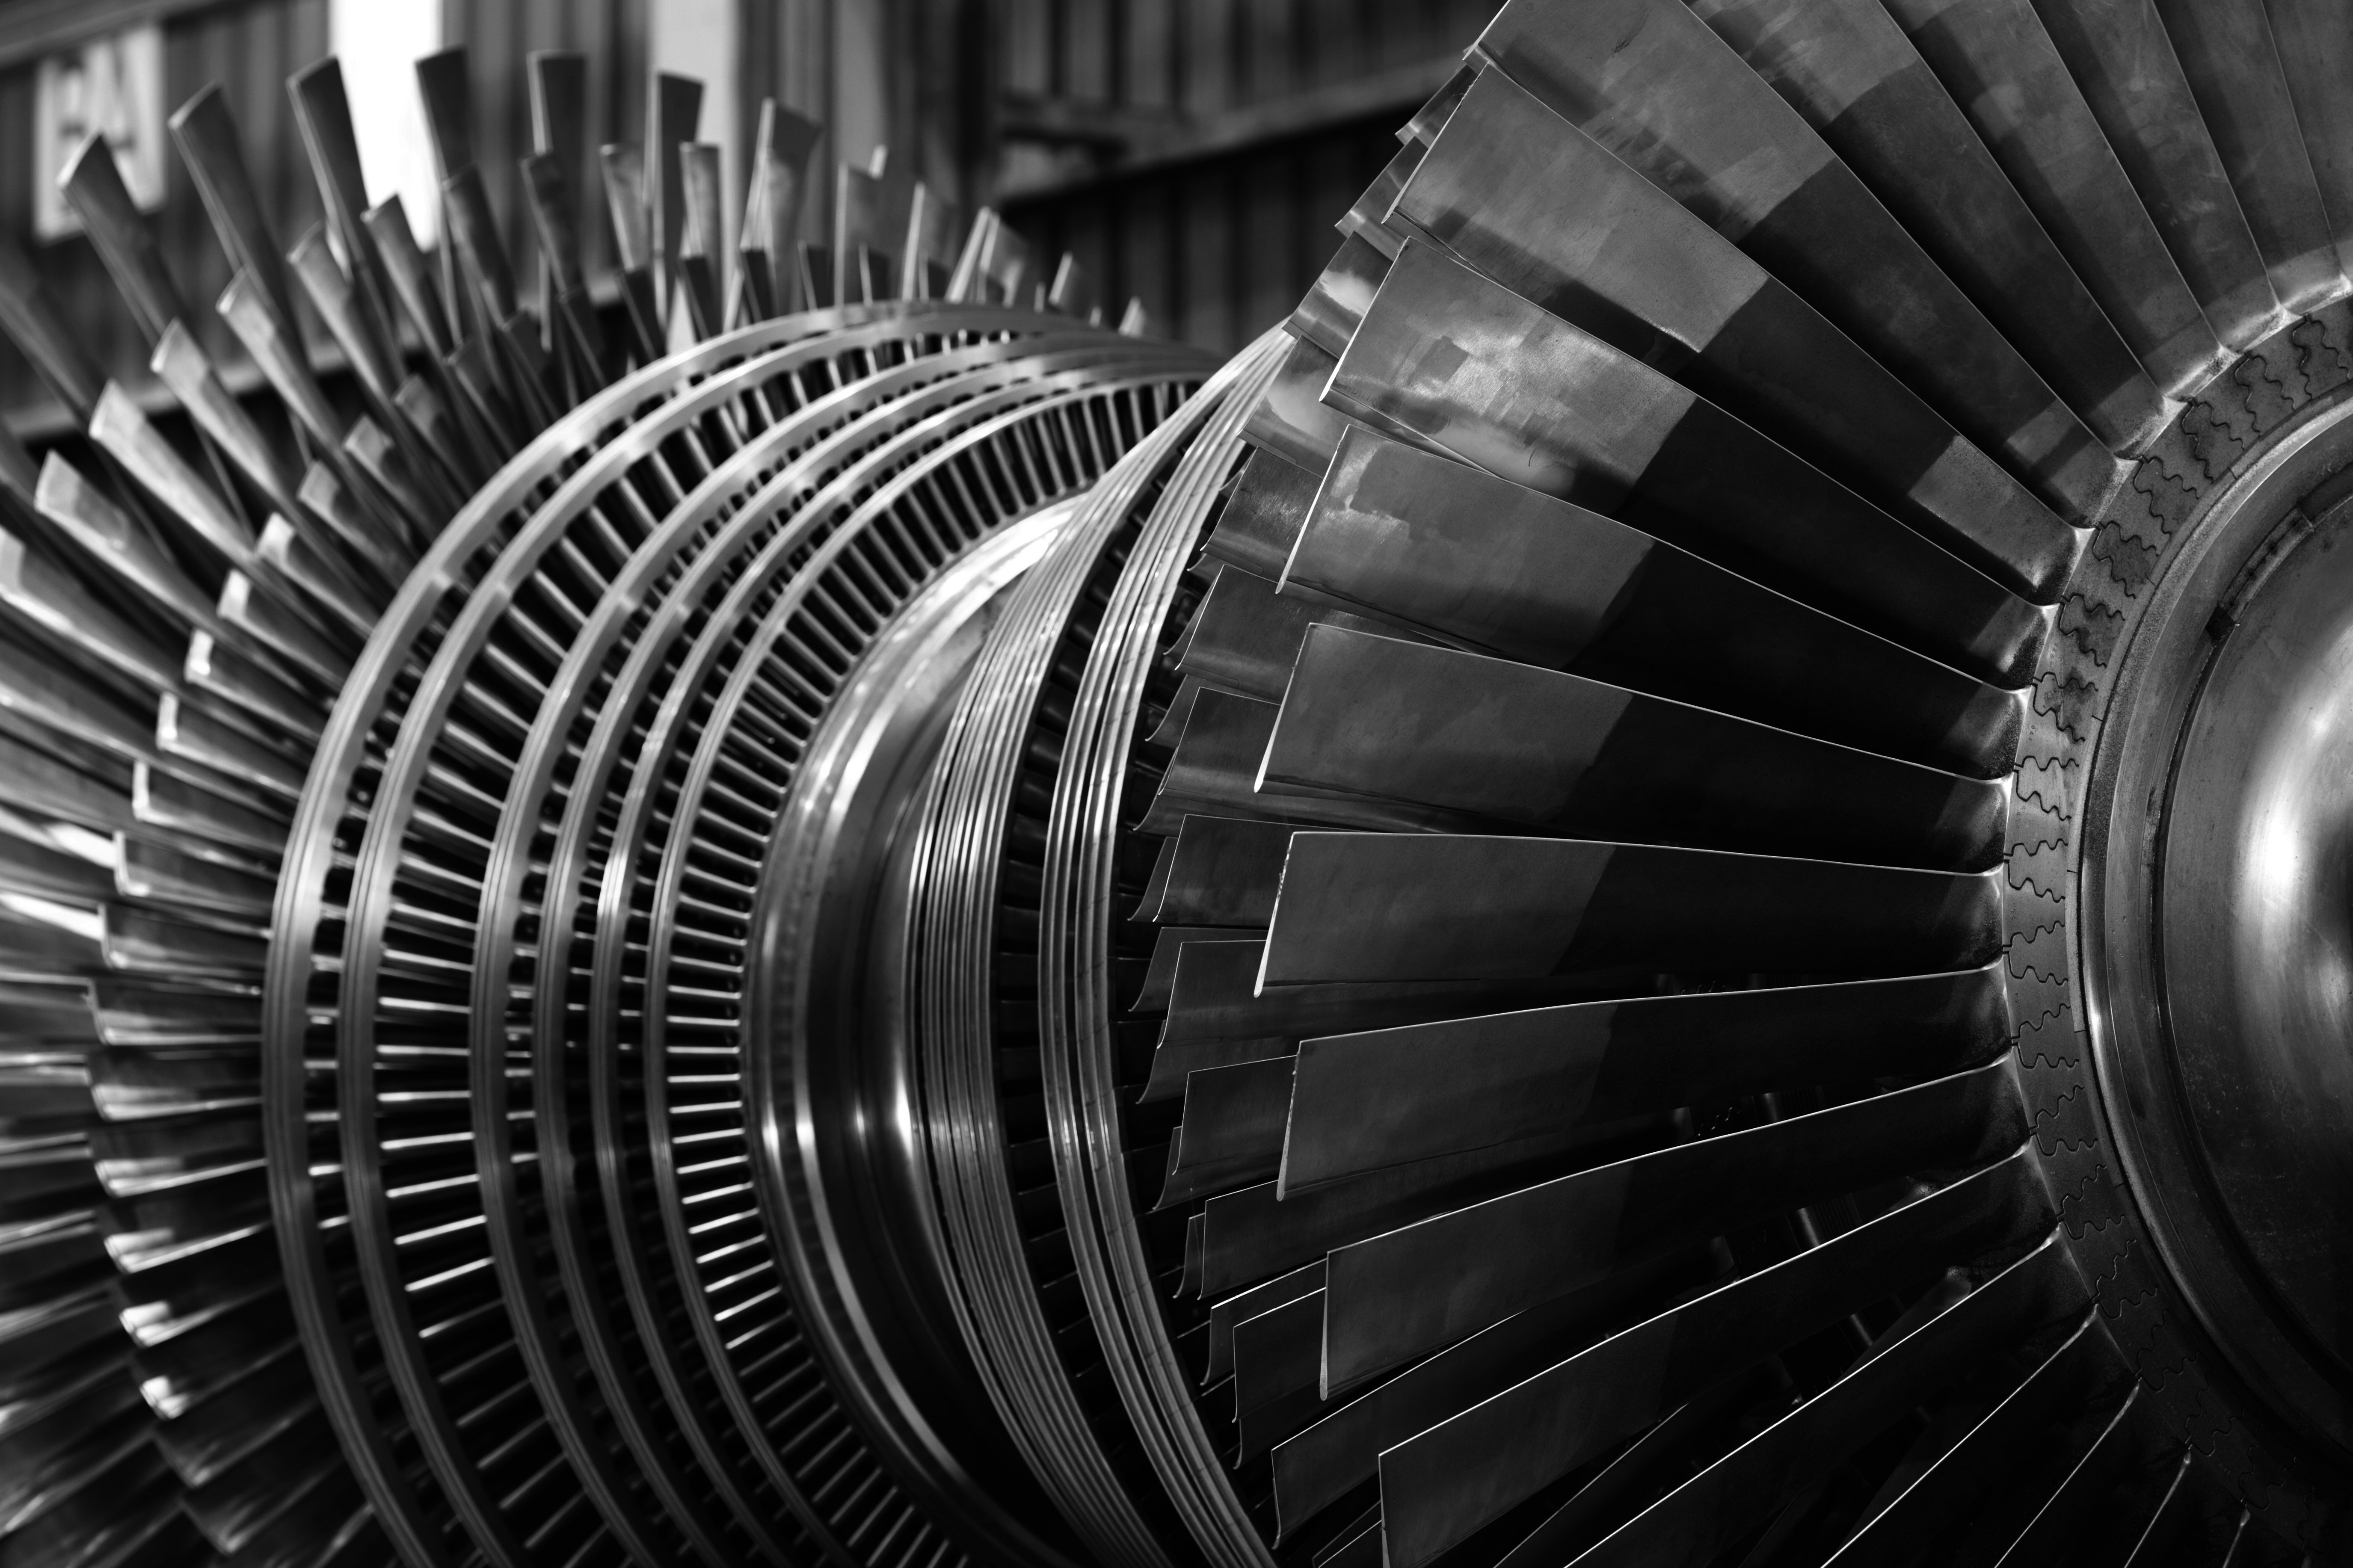 Investing in Designing Gas Turbines for Power Generation